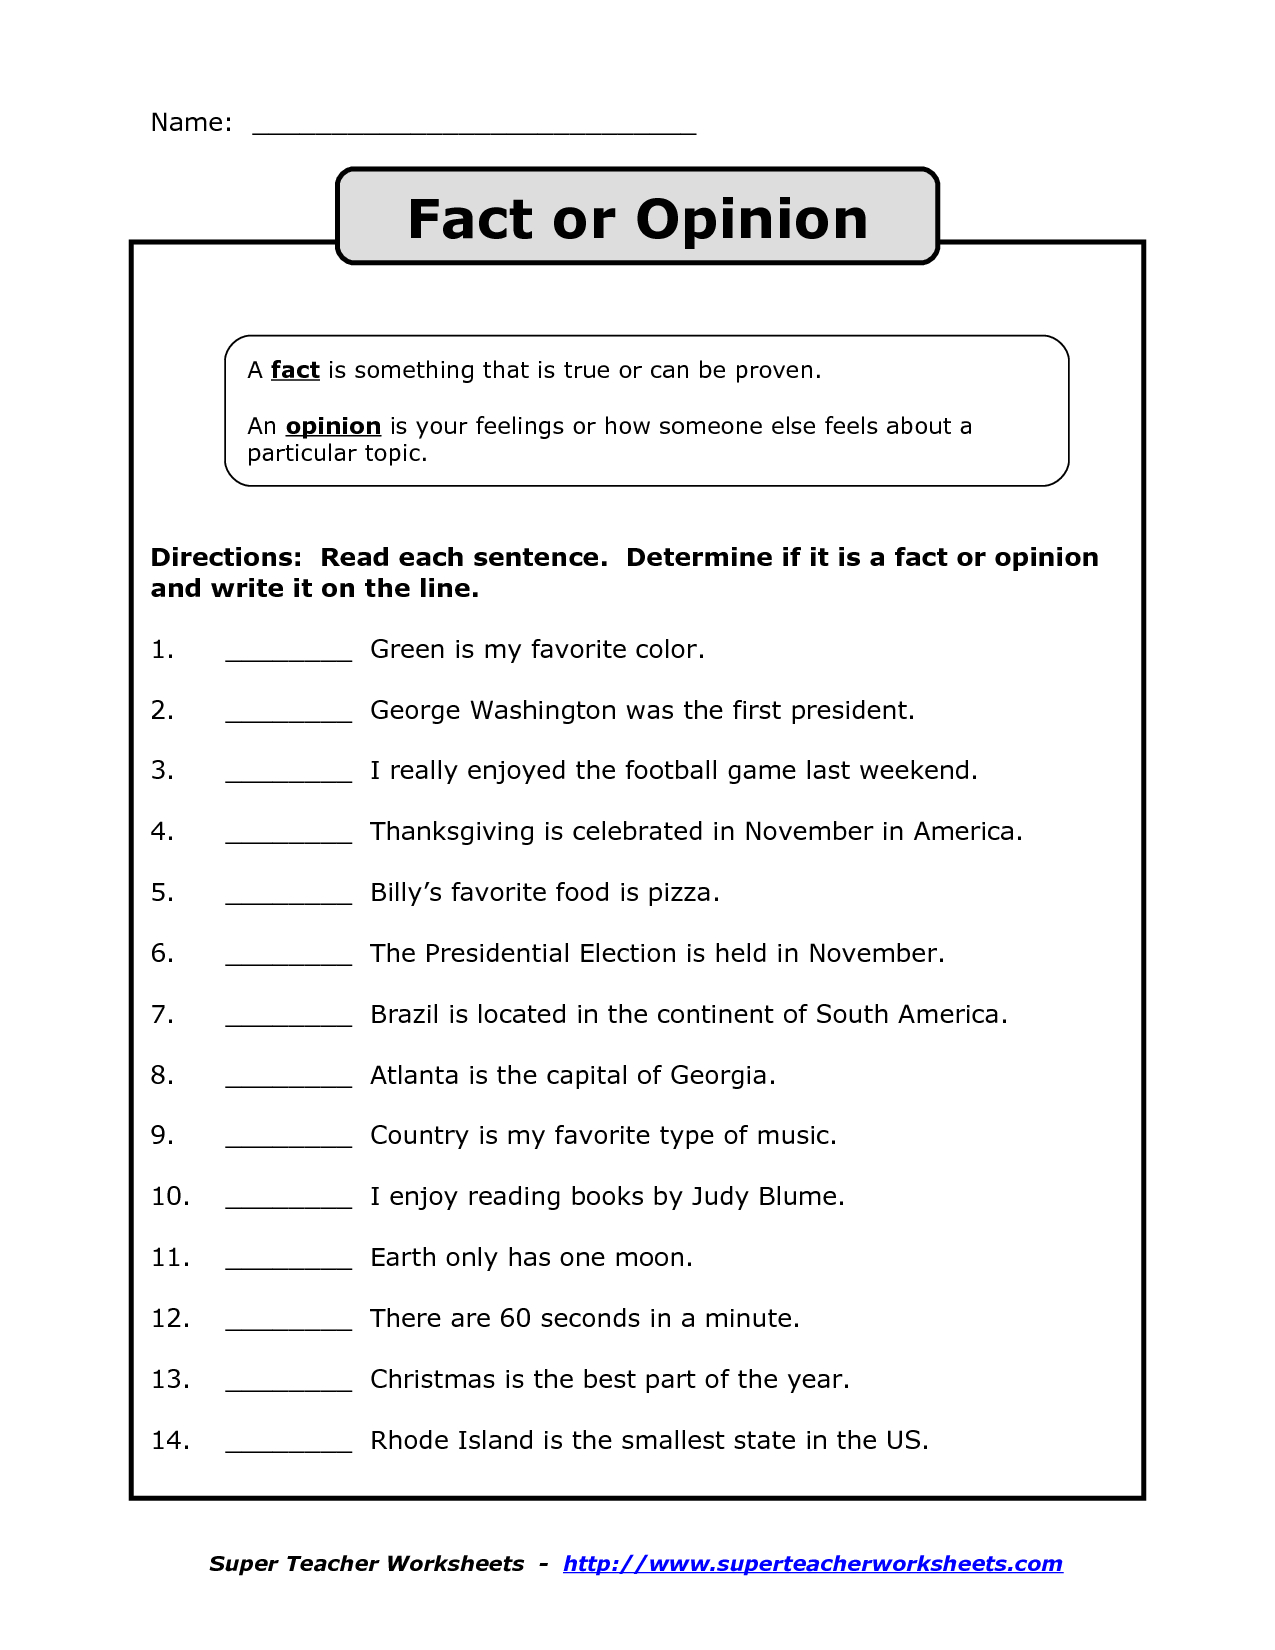 127 best fact opinion images fact opinion fact 1